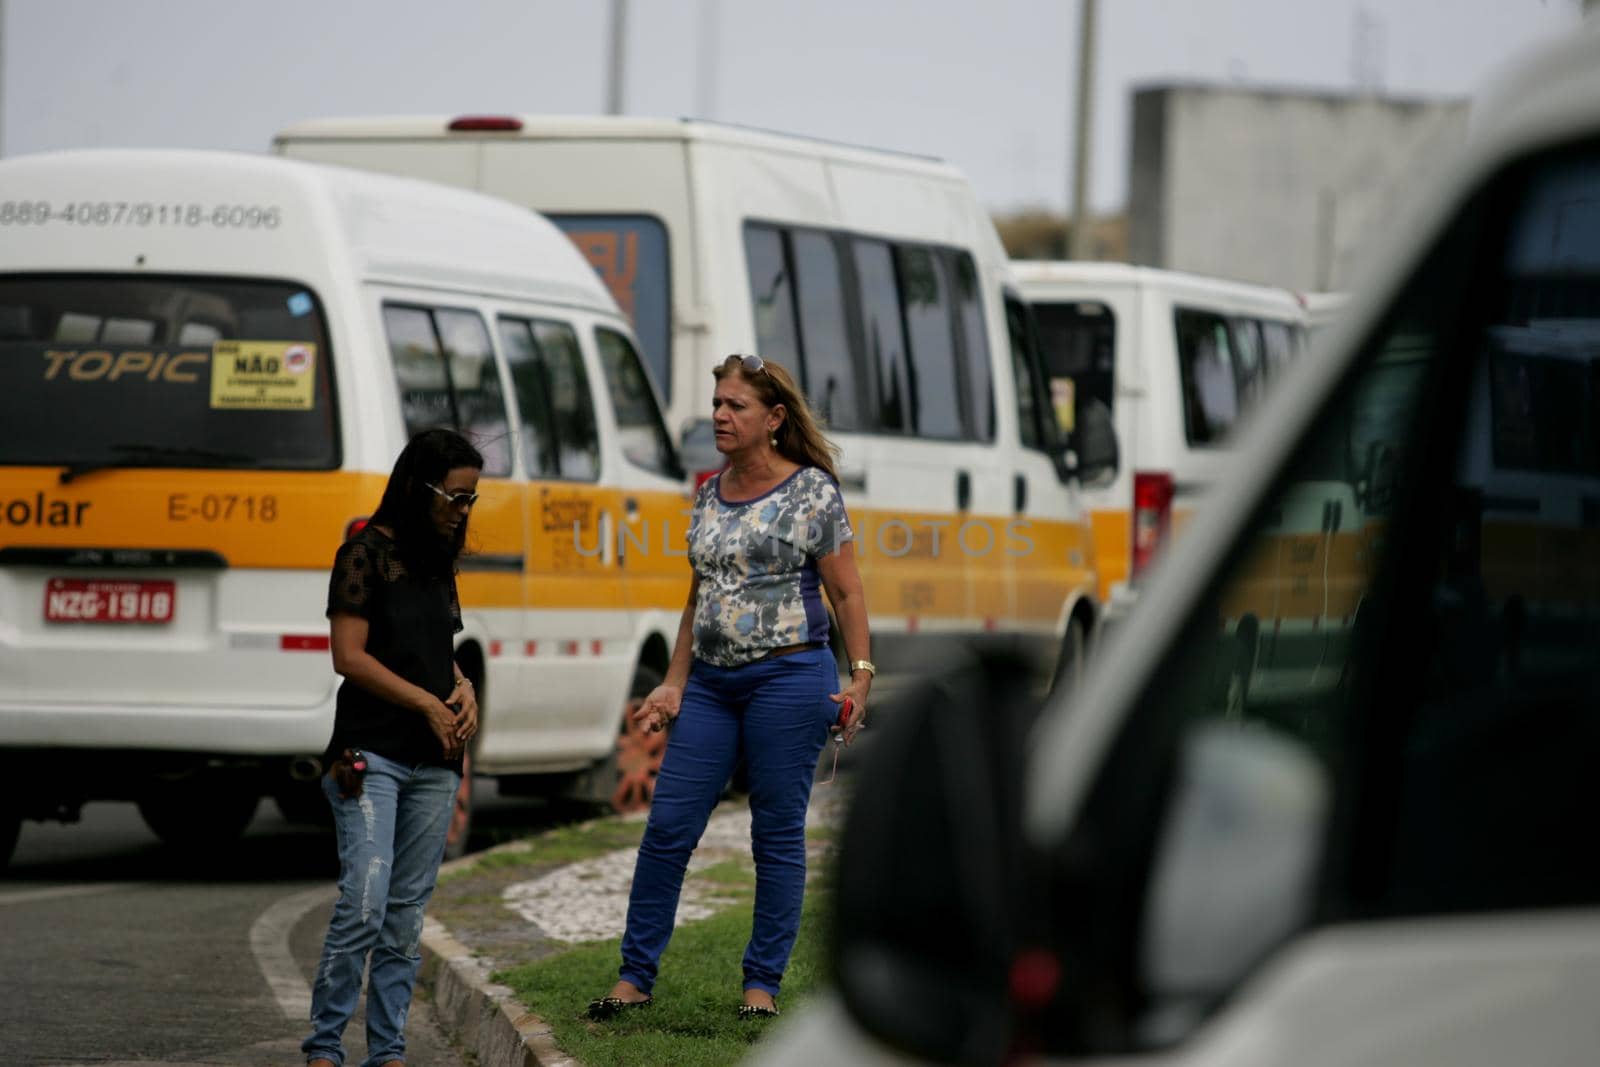 salvador, bahia / brazil - july17, 2015: Drivers who make school transportation protest at the Bahia Administrative Center in Salvador.

